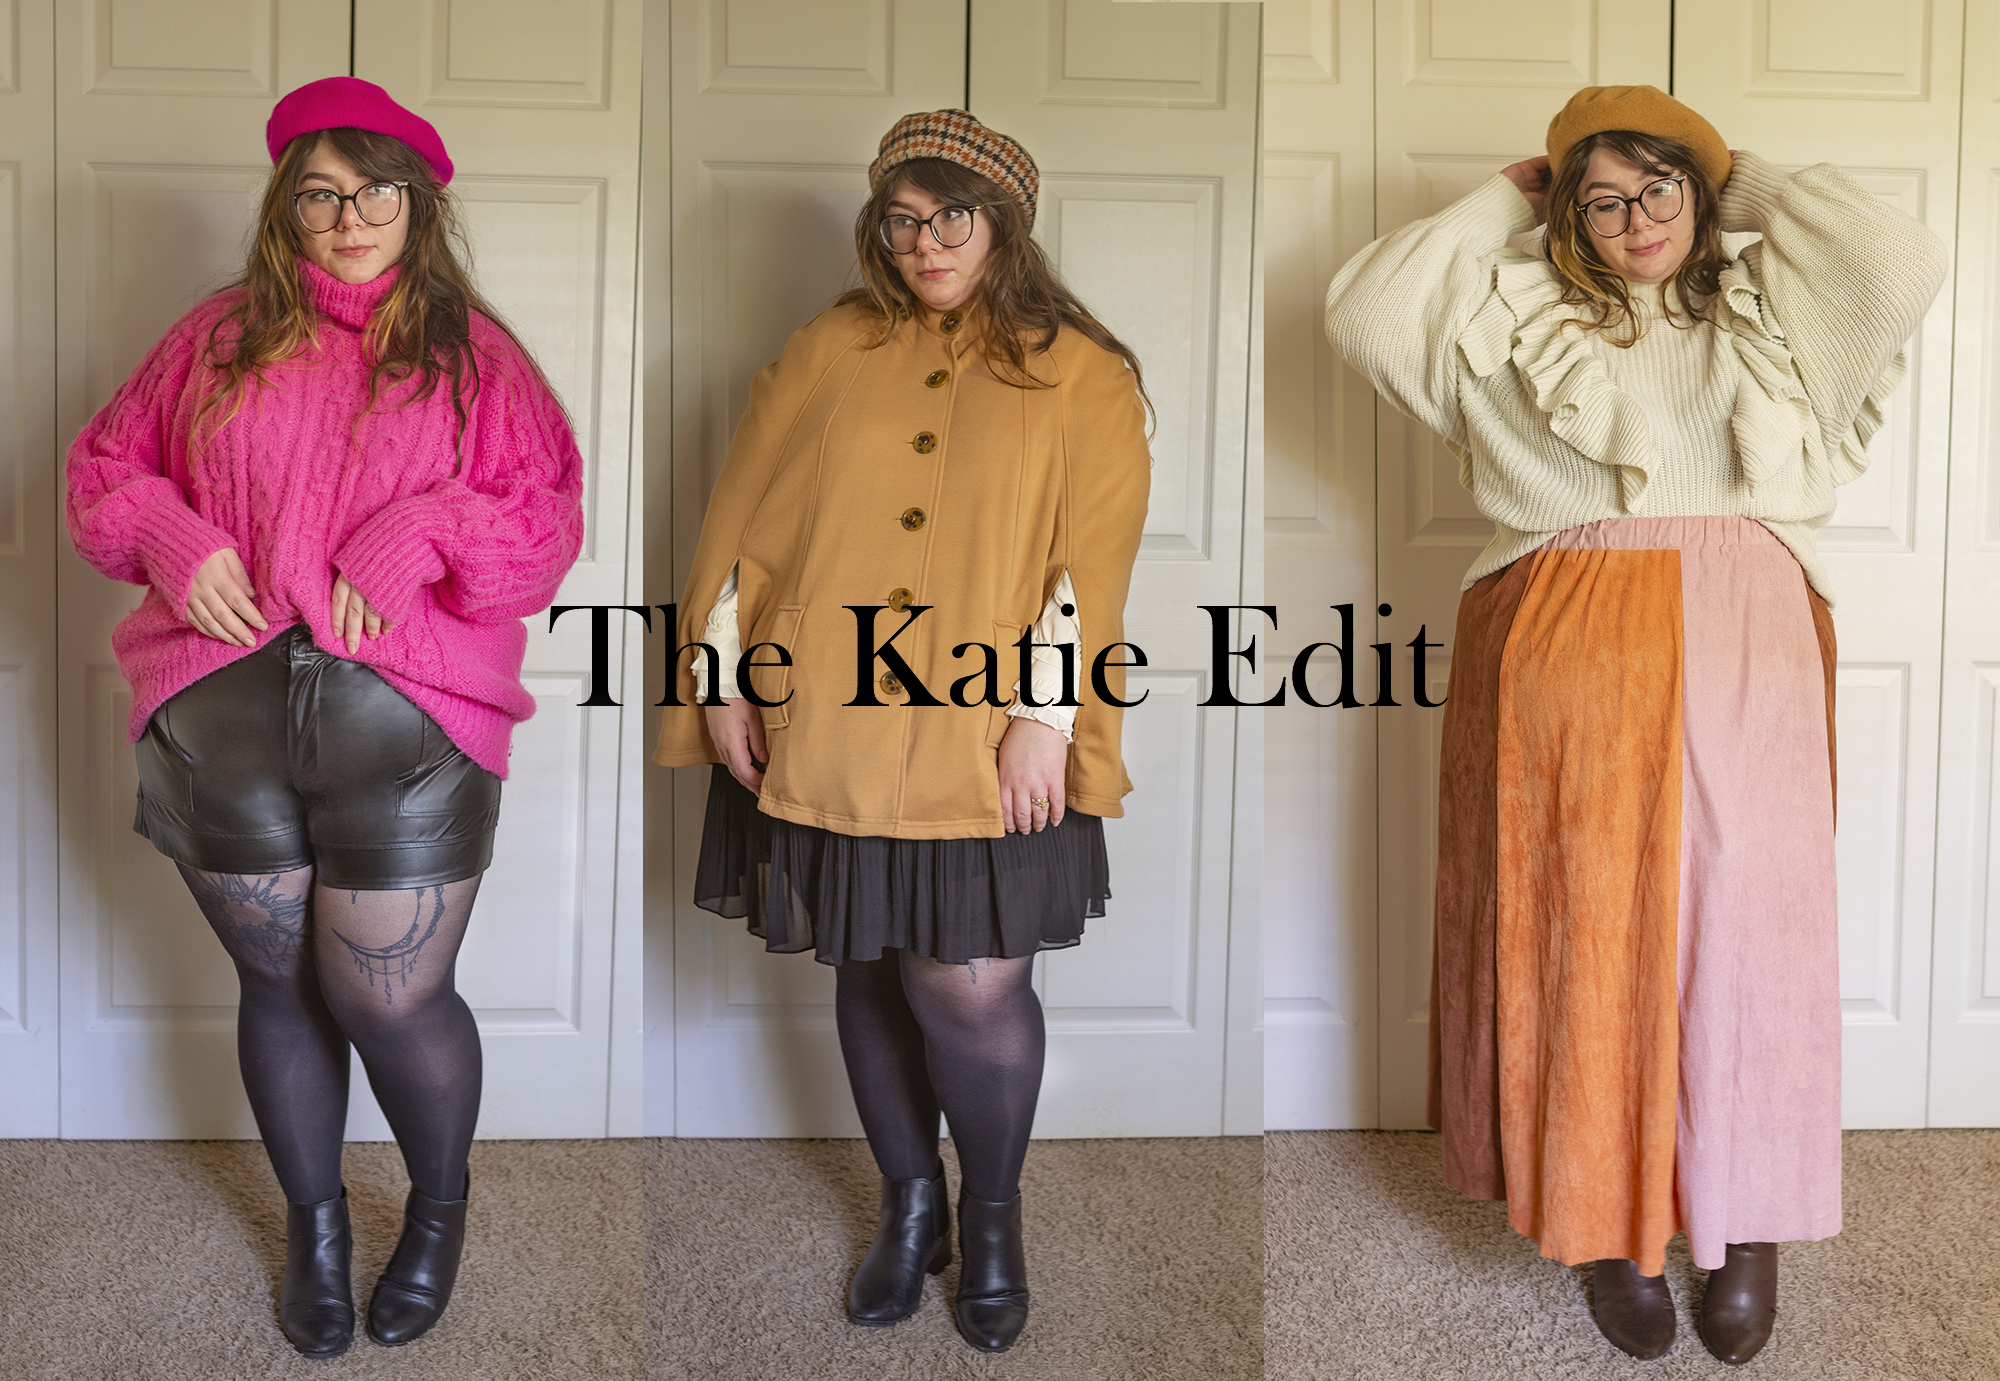 Outfits I Can't Wait to Wear This Fall & Winter Season, an outfit by Katie Selt for The Katie Edit www.thekatieedit.com